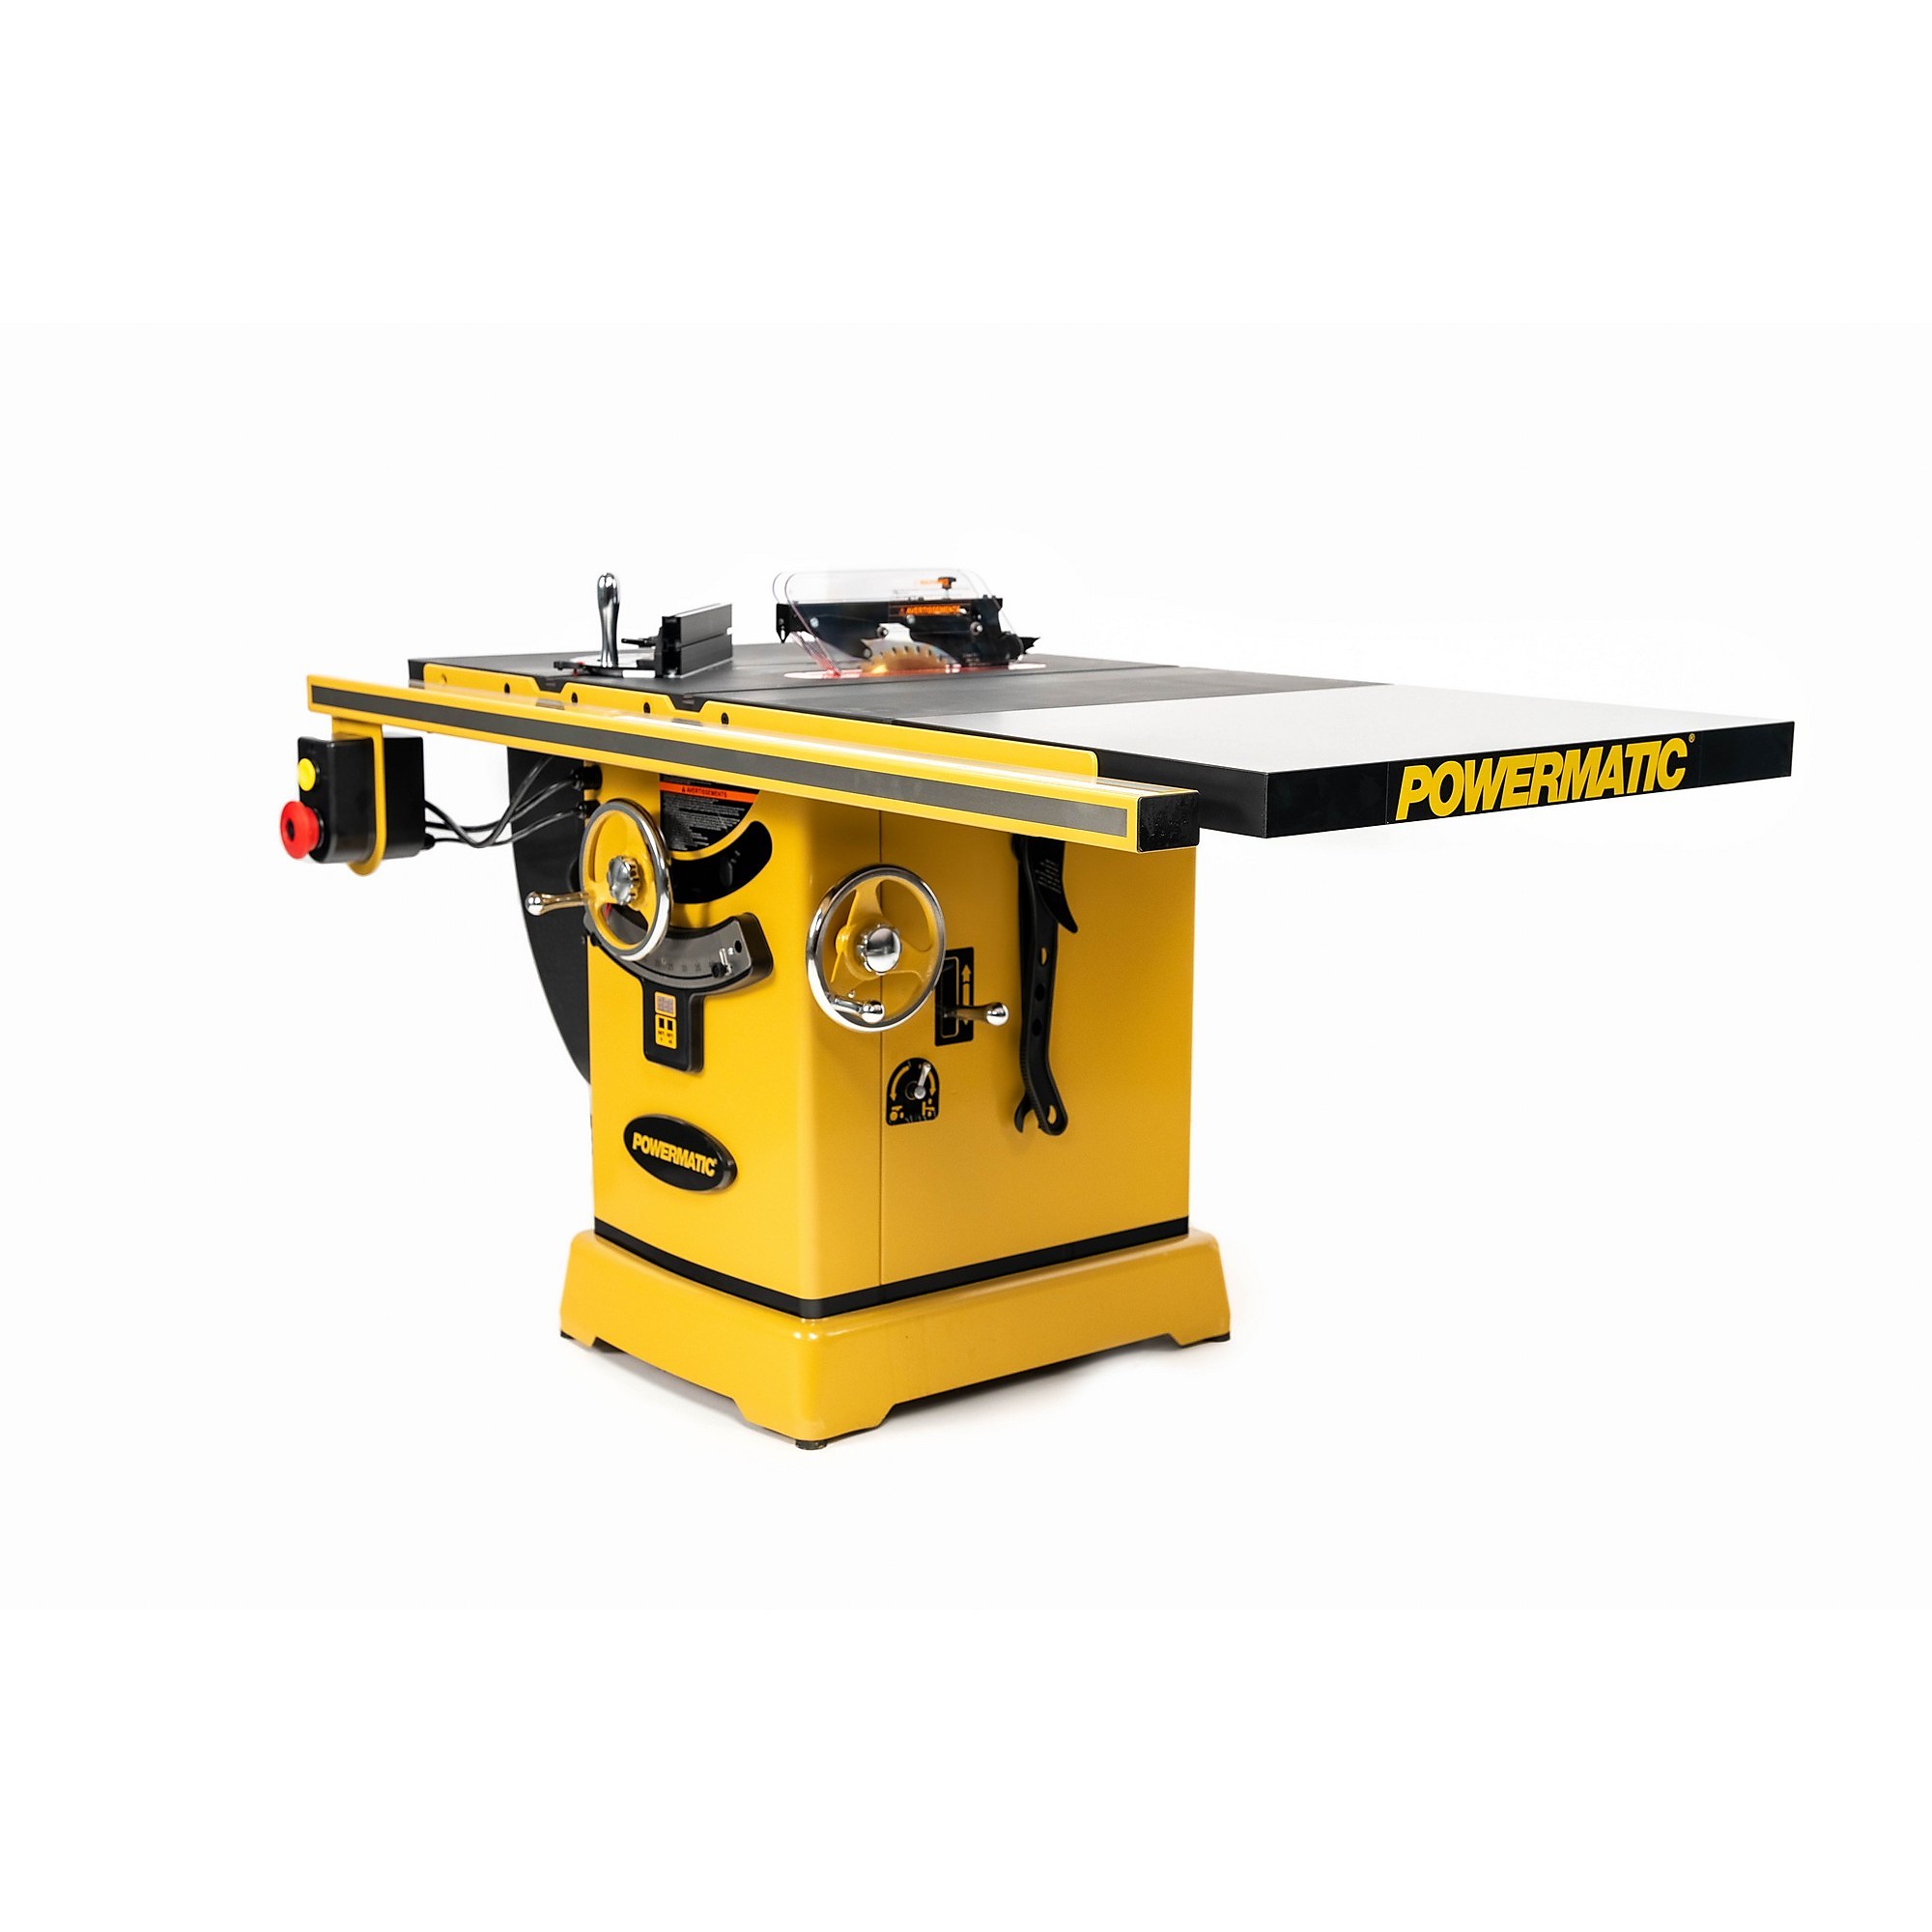 Powermatic, ArmorGlide Table Saw, Blade Diameter 10 Horsepower 1.75 HP, Volts 115 Model PM1000T